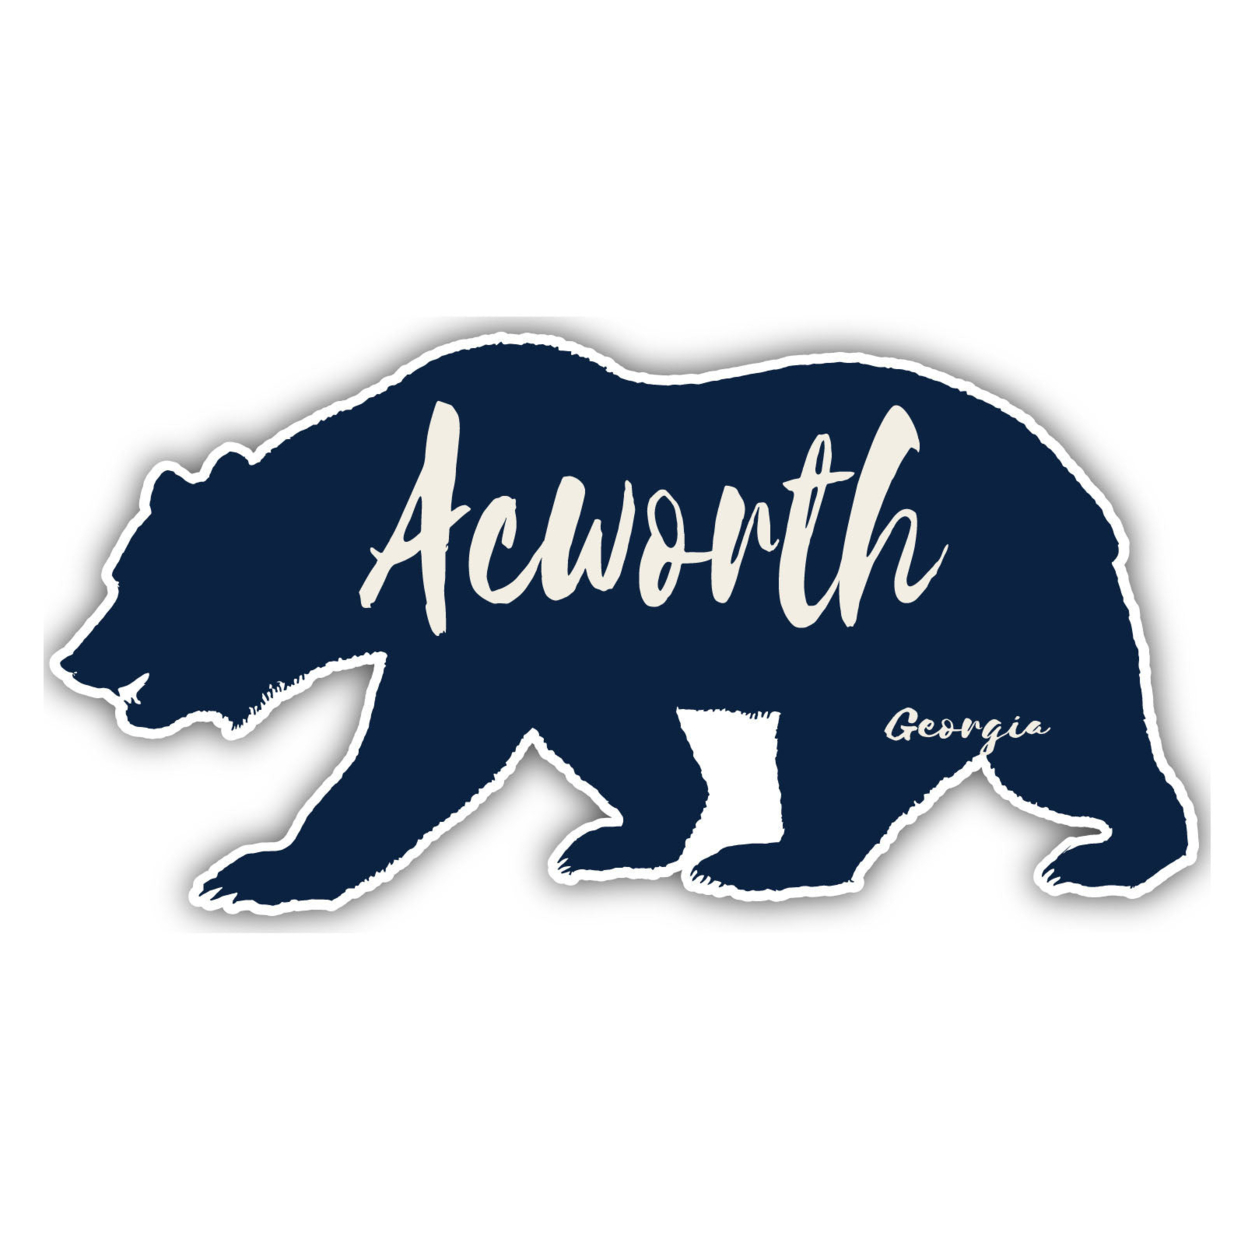 Acworth Georgia Souvenir Decorative Stickers (Choose Theme And Size) - 4-Pack, 8-Inch, Great Outdoors